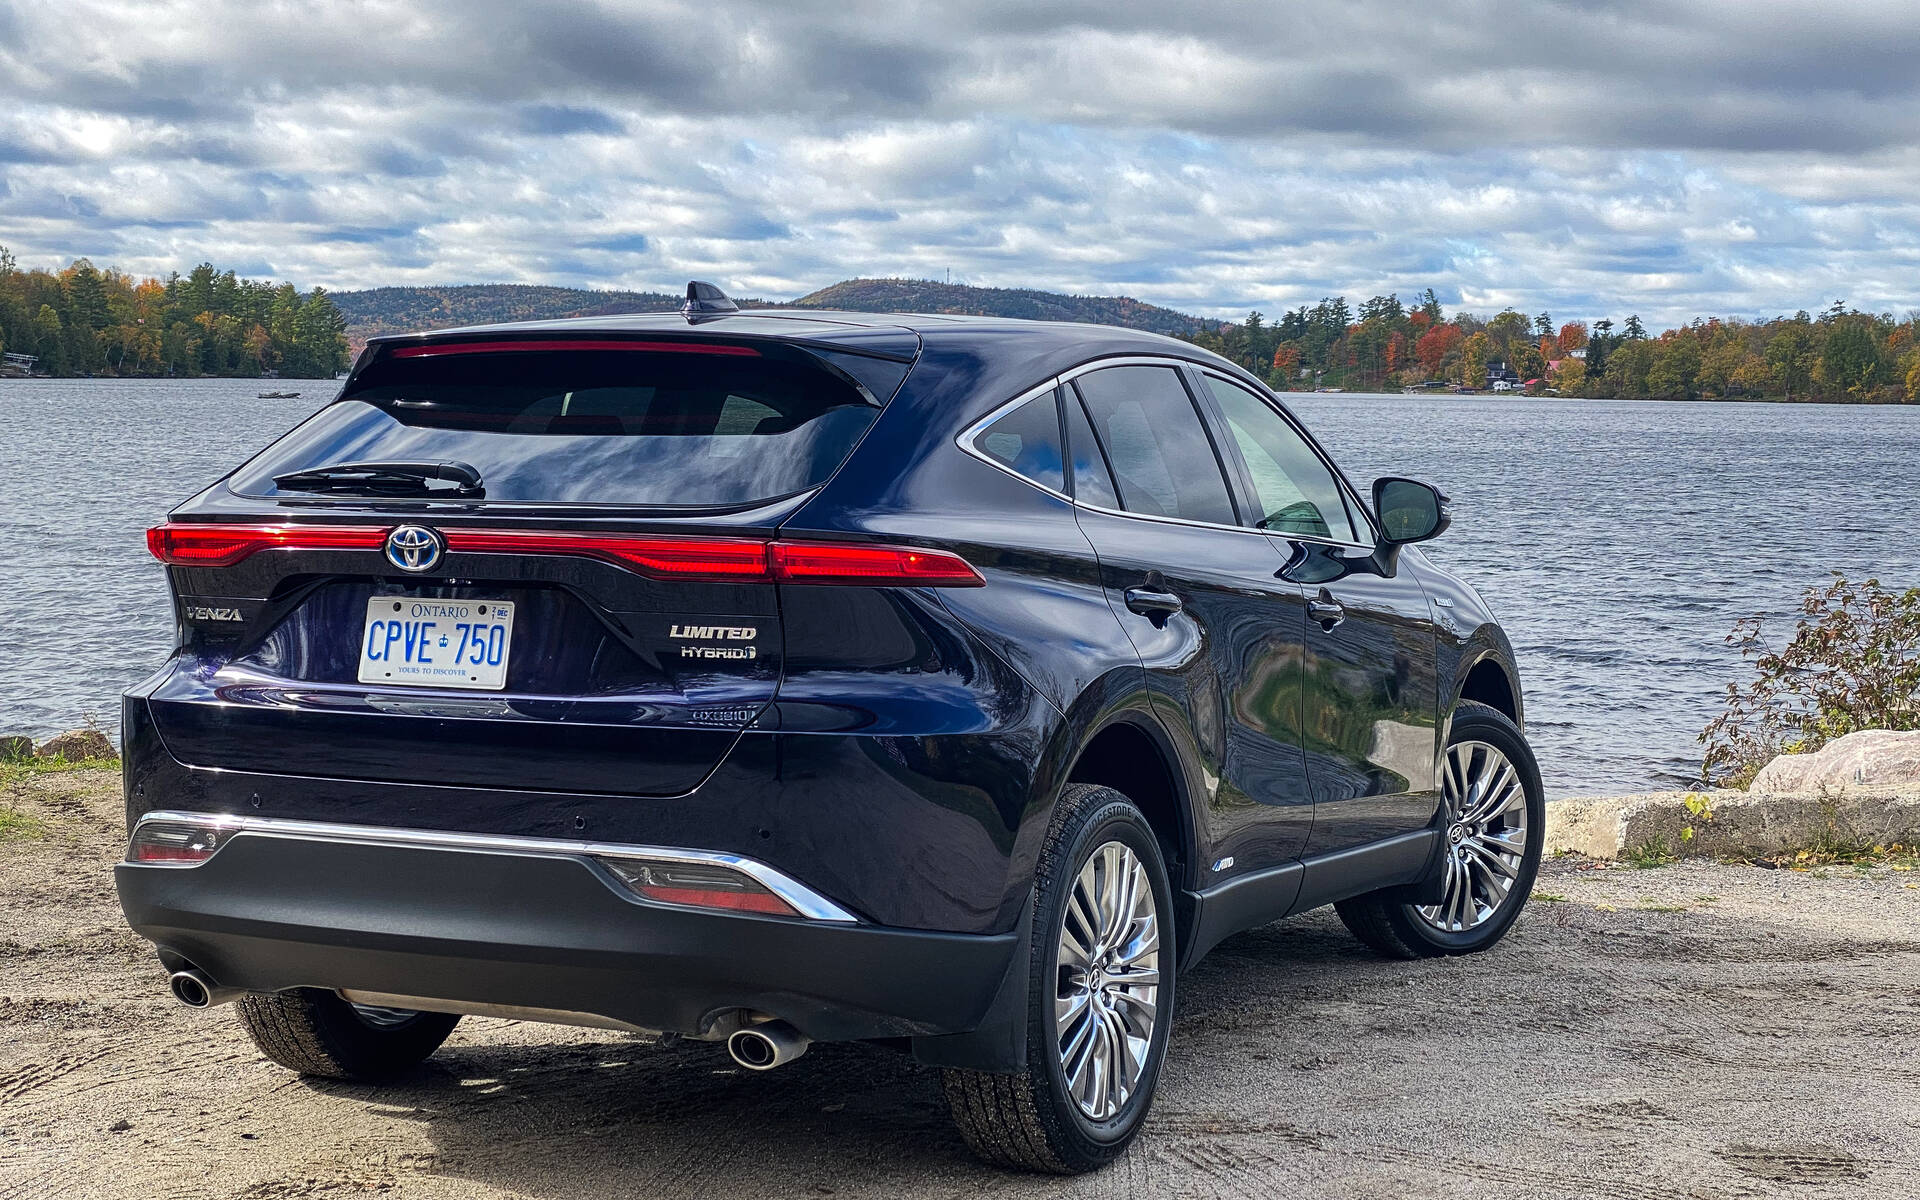 2021 Toyota Venza: From Large Camry to Halo Product - 8/27